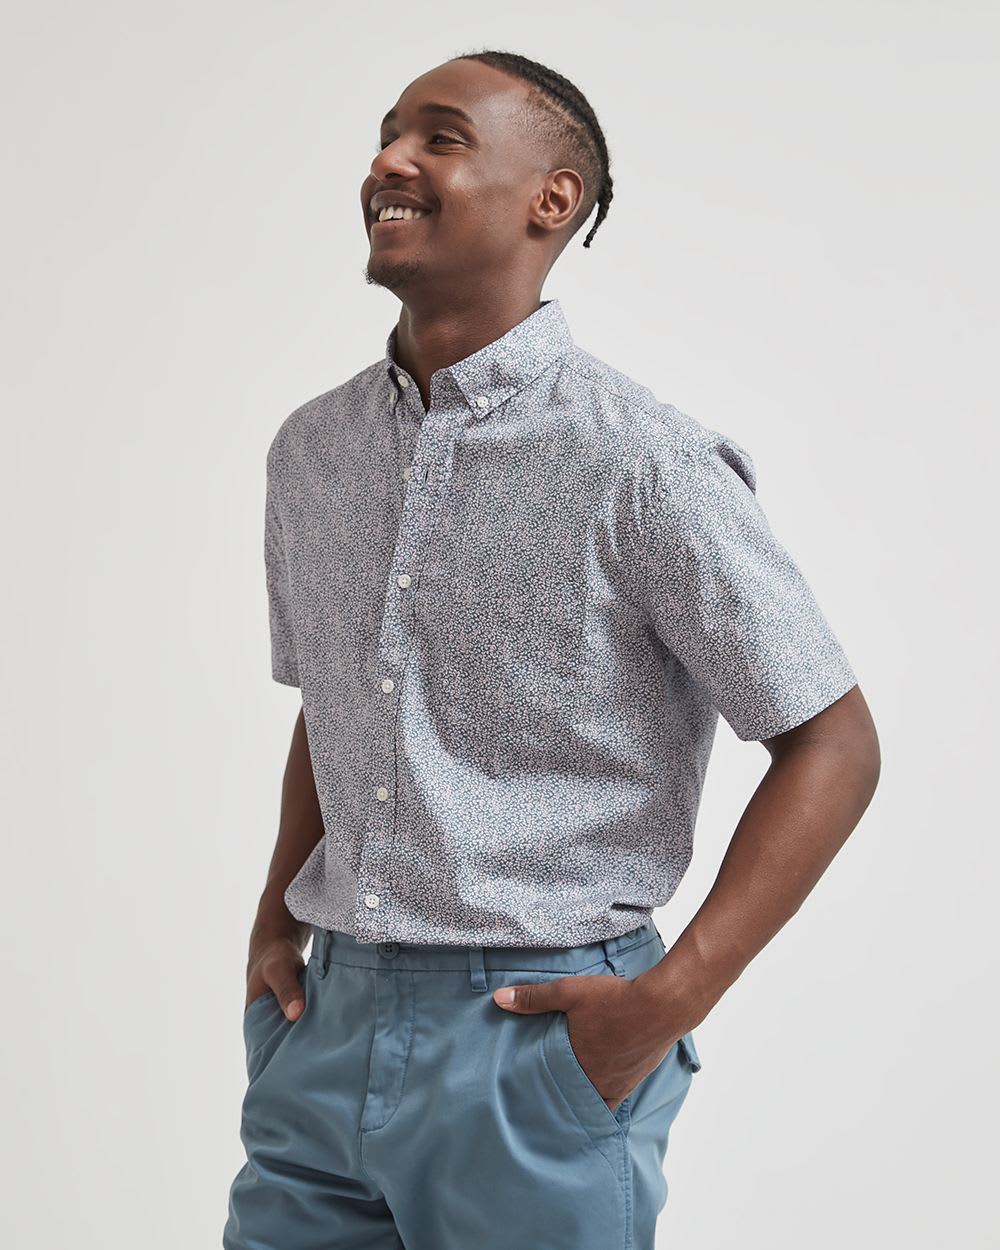 image of a model wearing a short sleeve button up paisley shirt